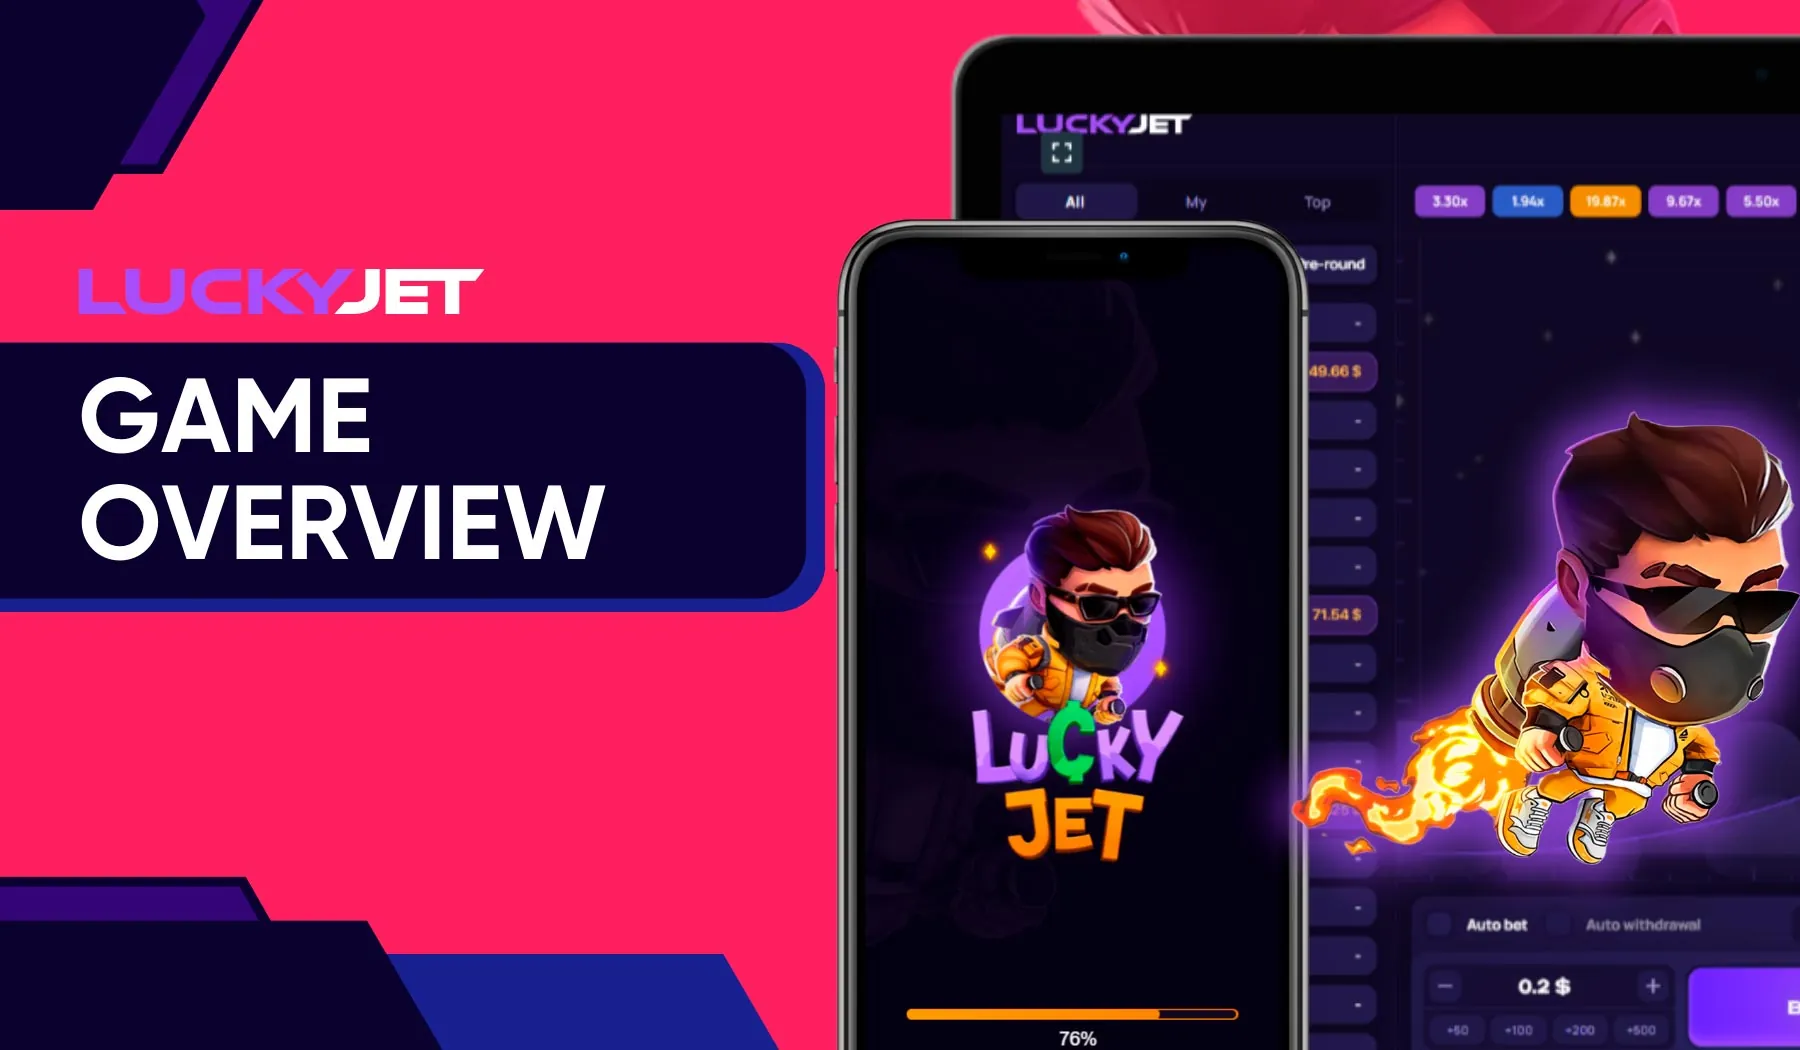 About Lucky Jet signals online bots